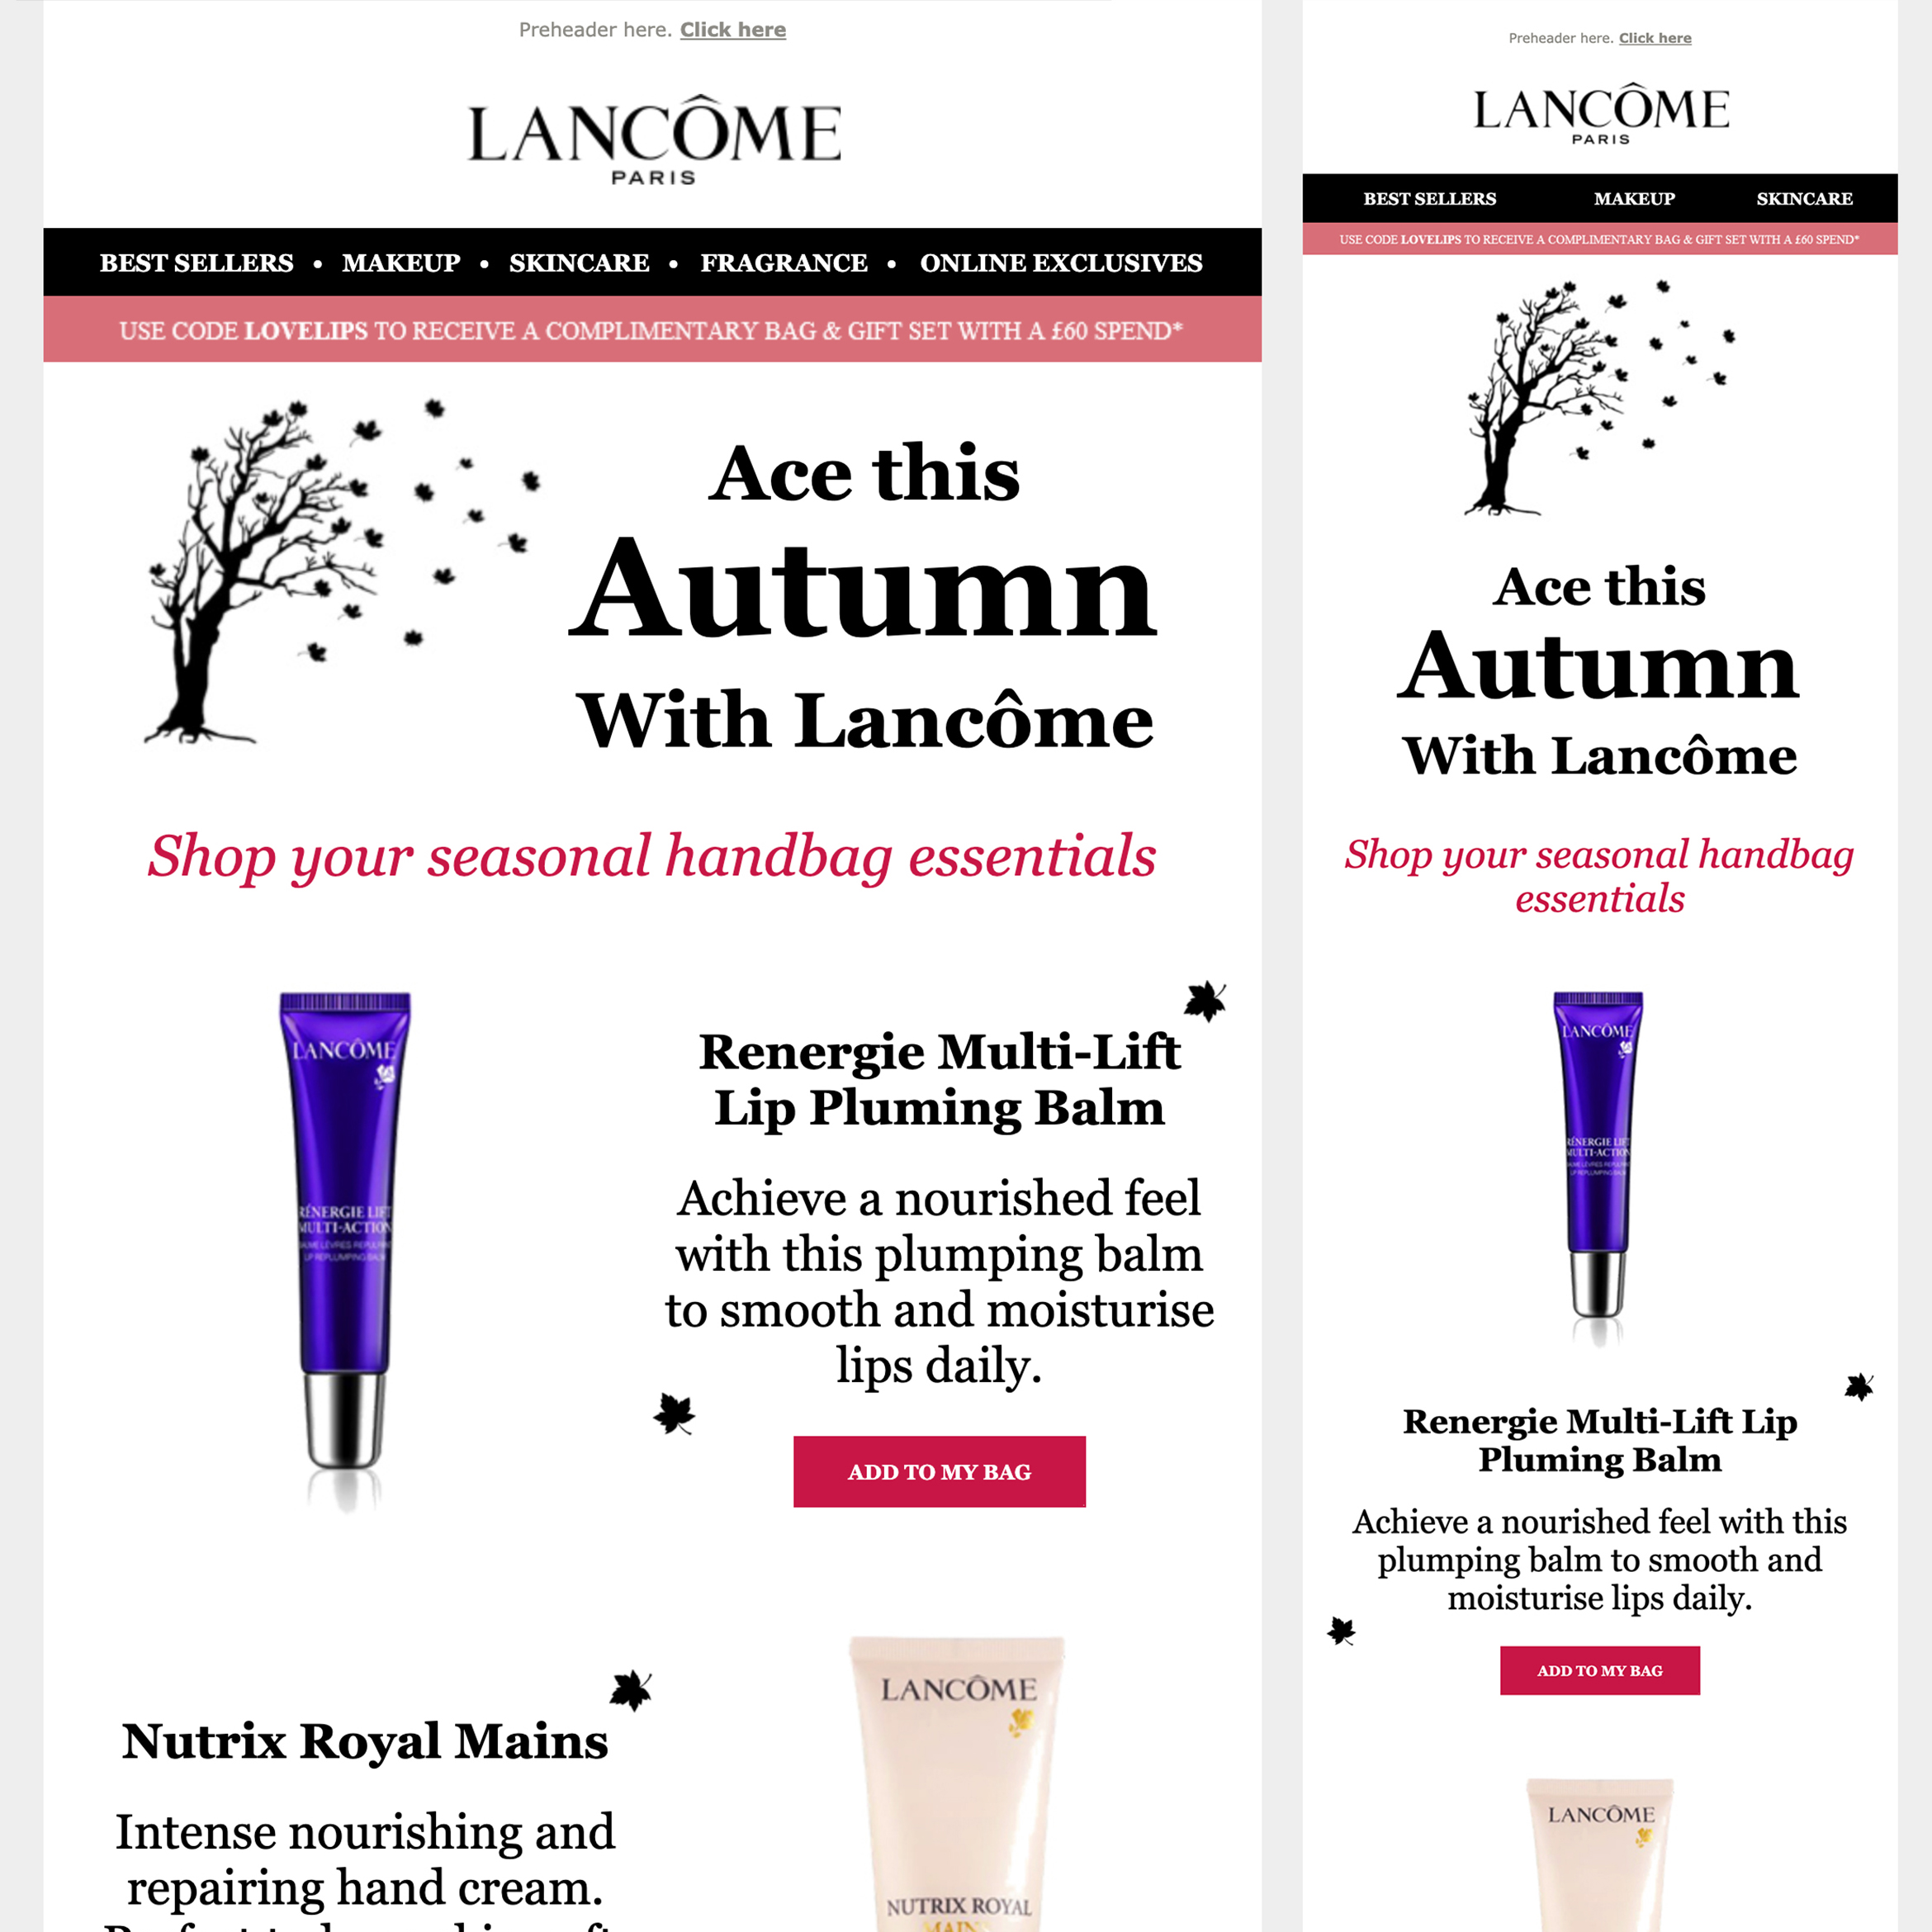 Lancome email